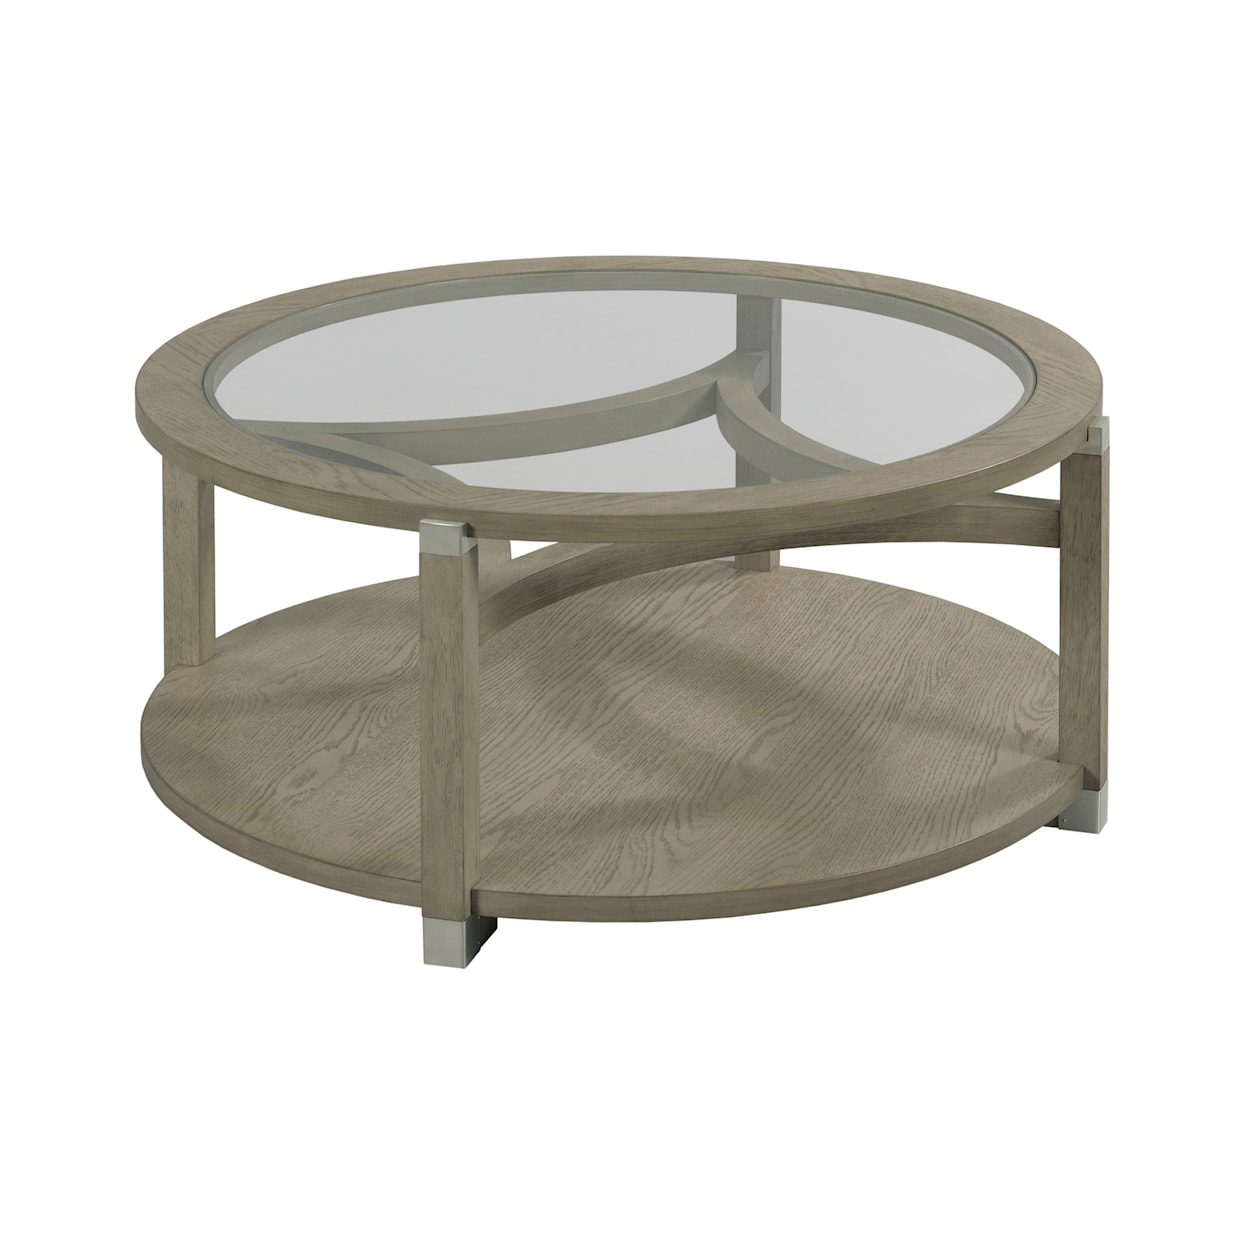 Hammary Solstice Round Coffee Table